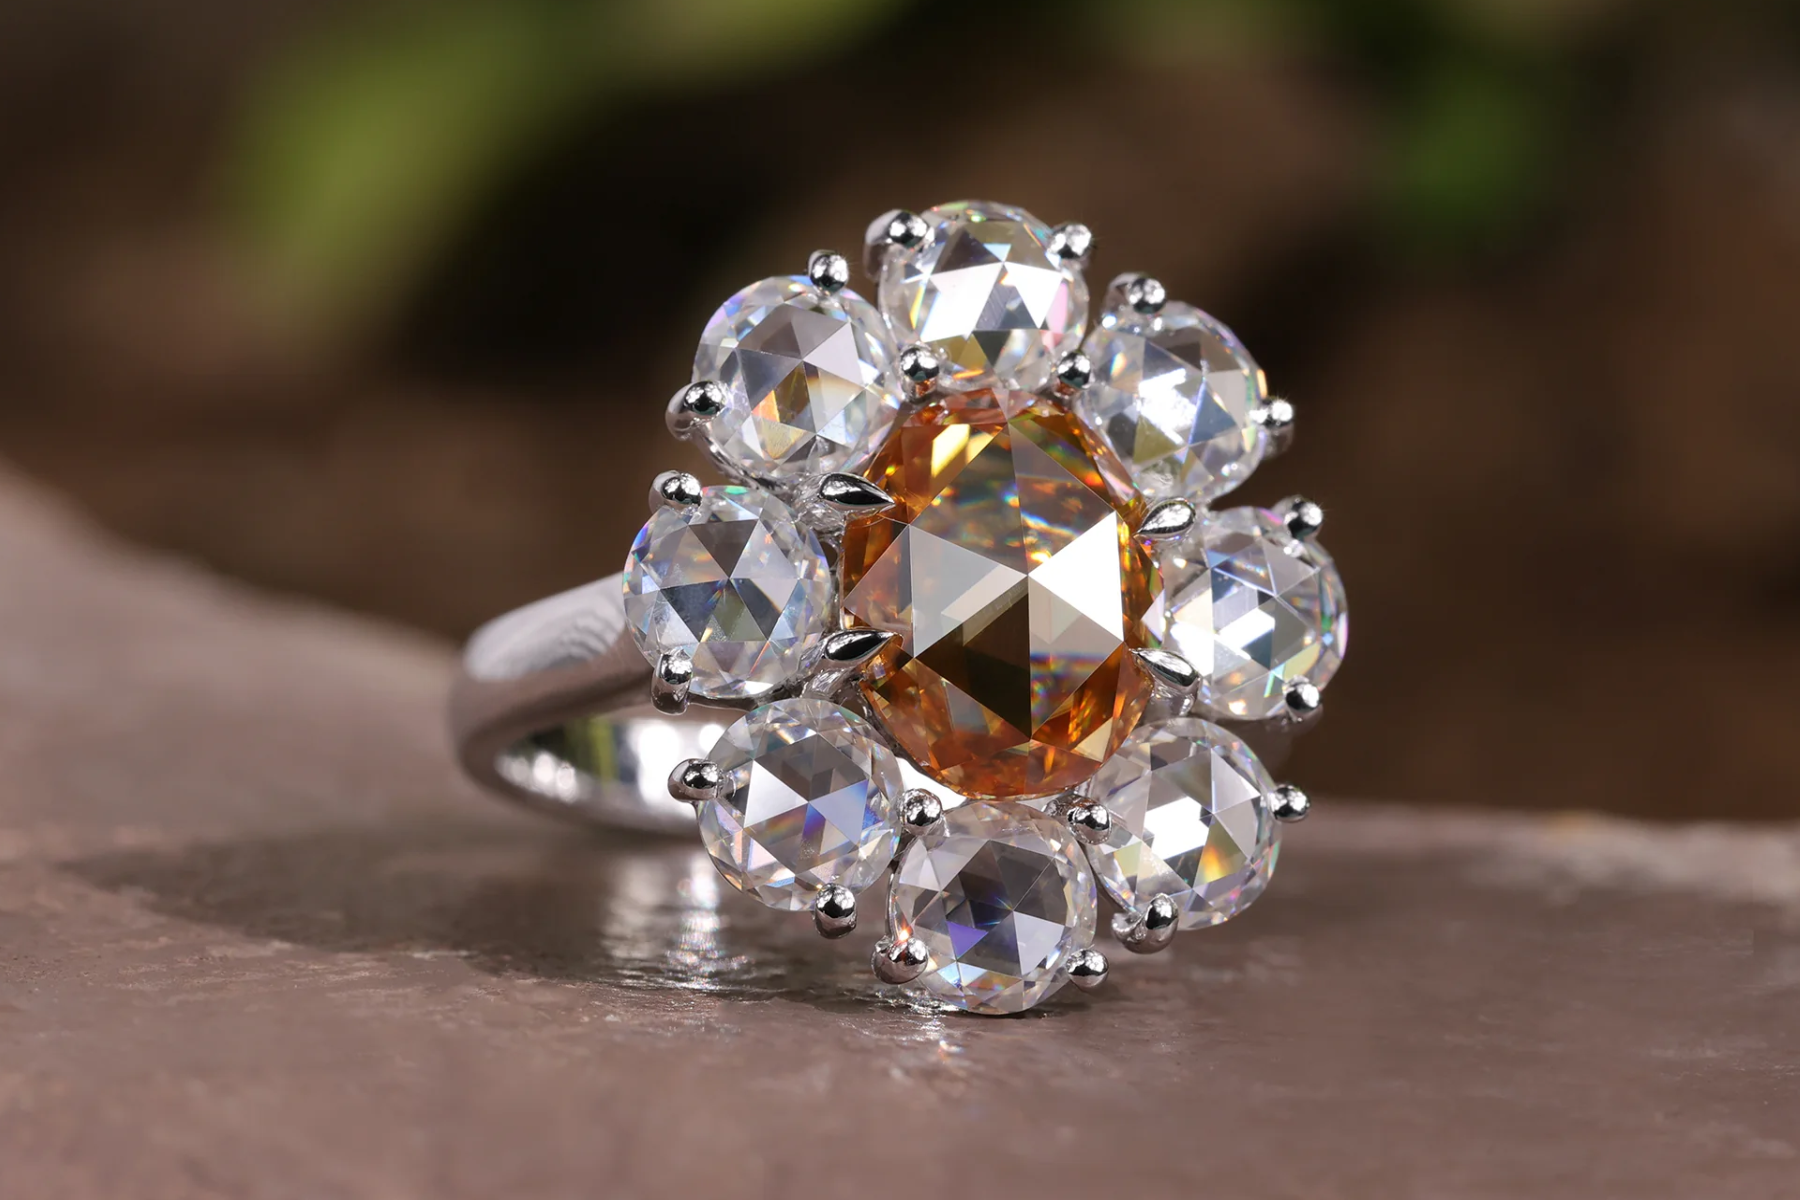 A ring with a flower made of stones